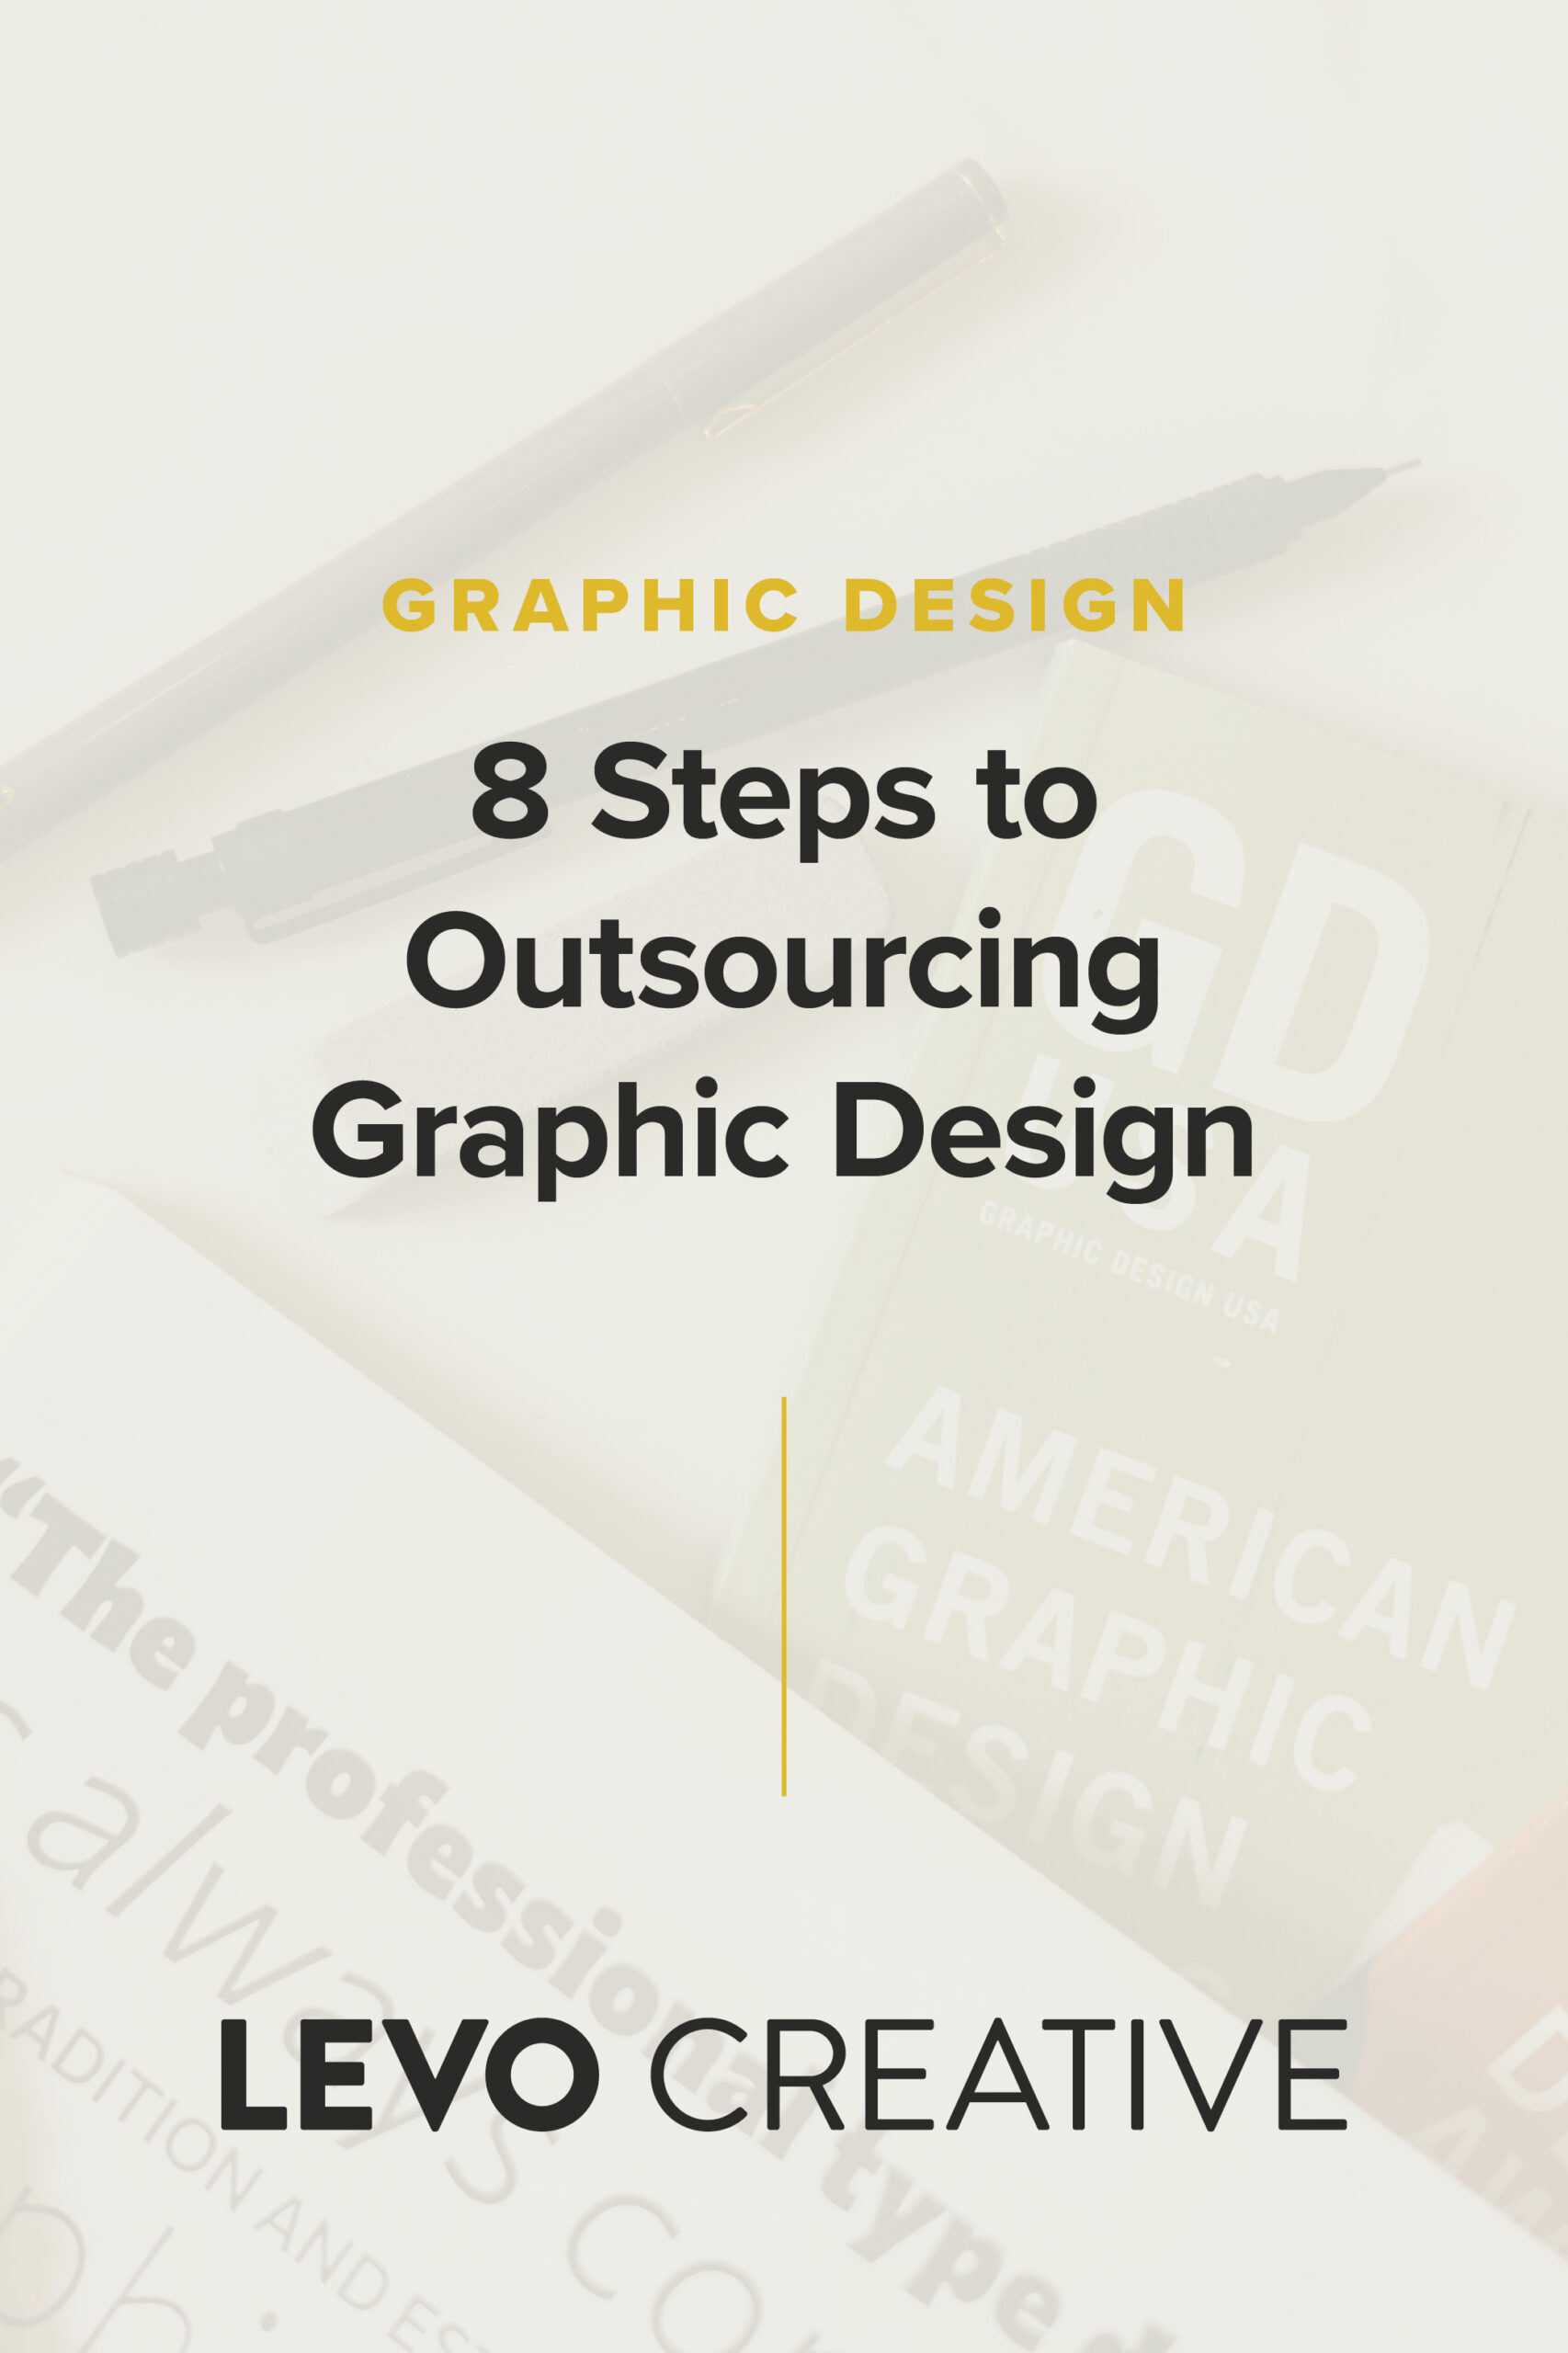 8 Steps to Outsourcing Graphic Design